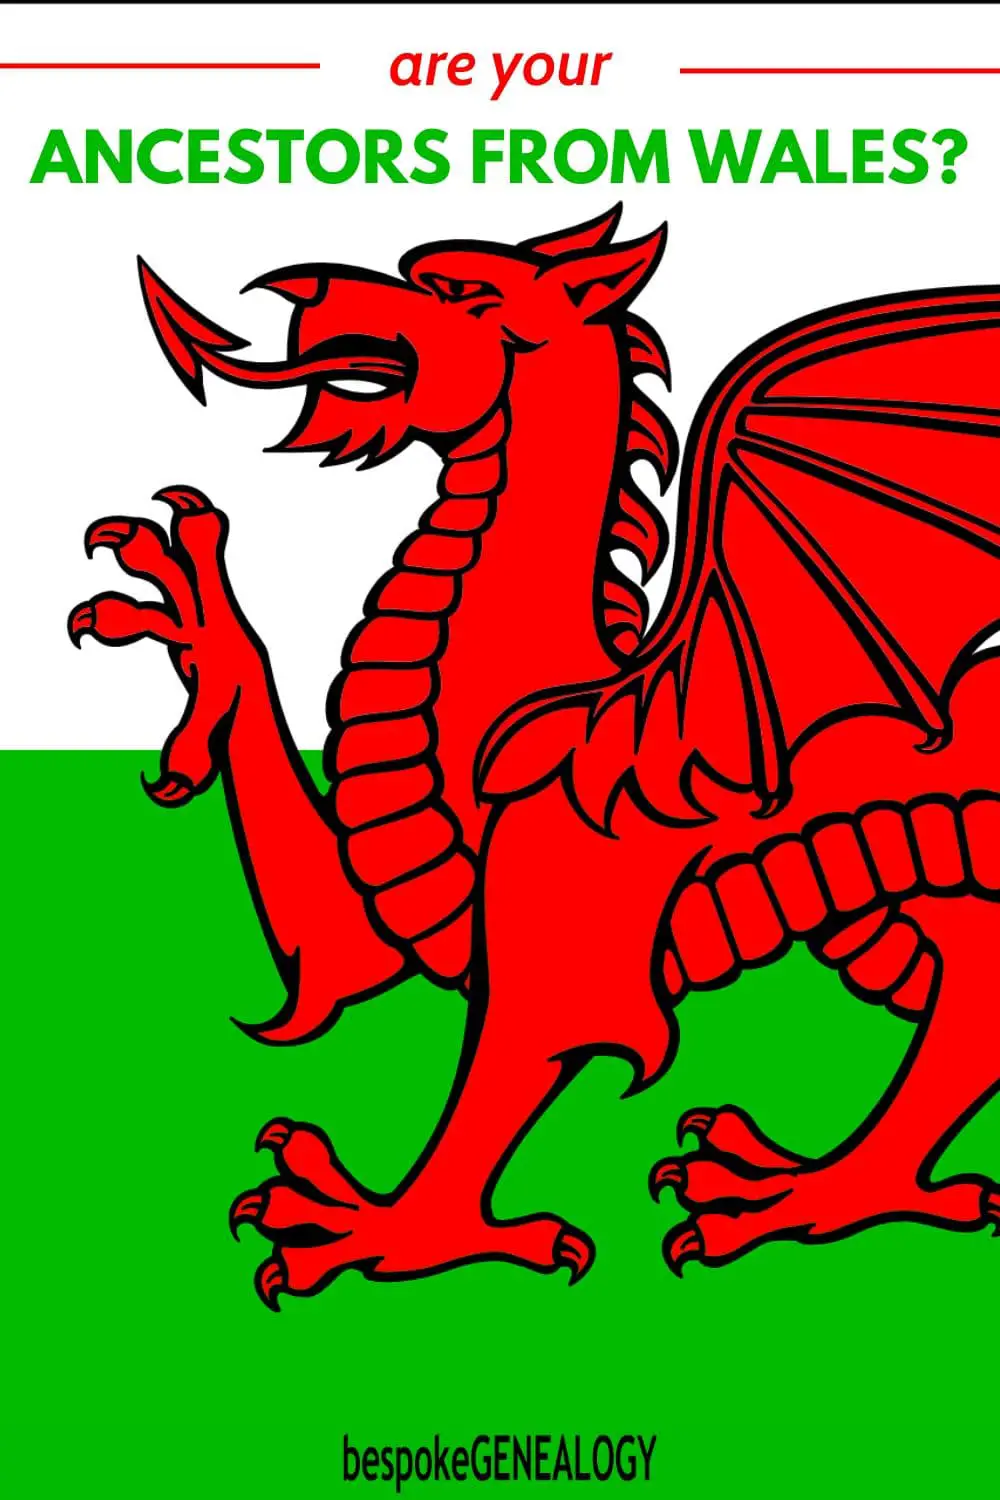 Are your ancestors from Wales. Part of the Welsh flag